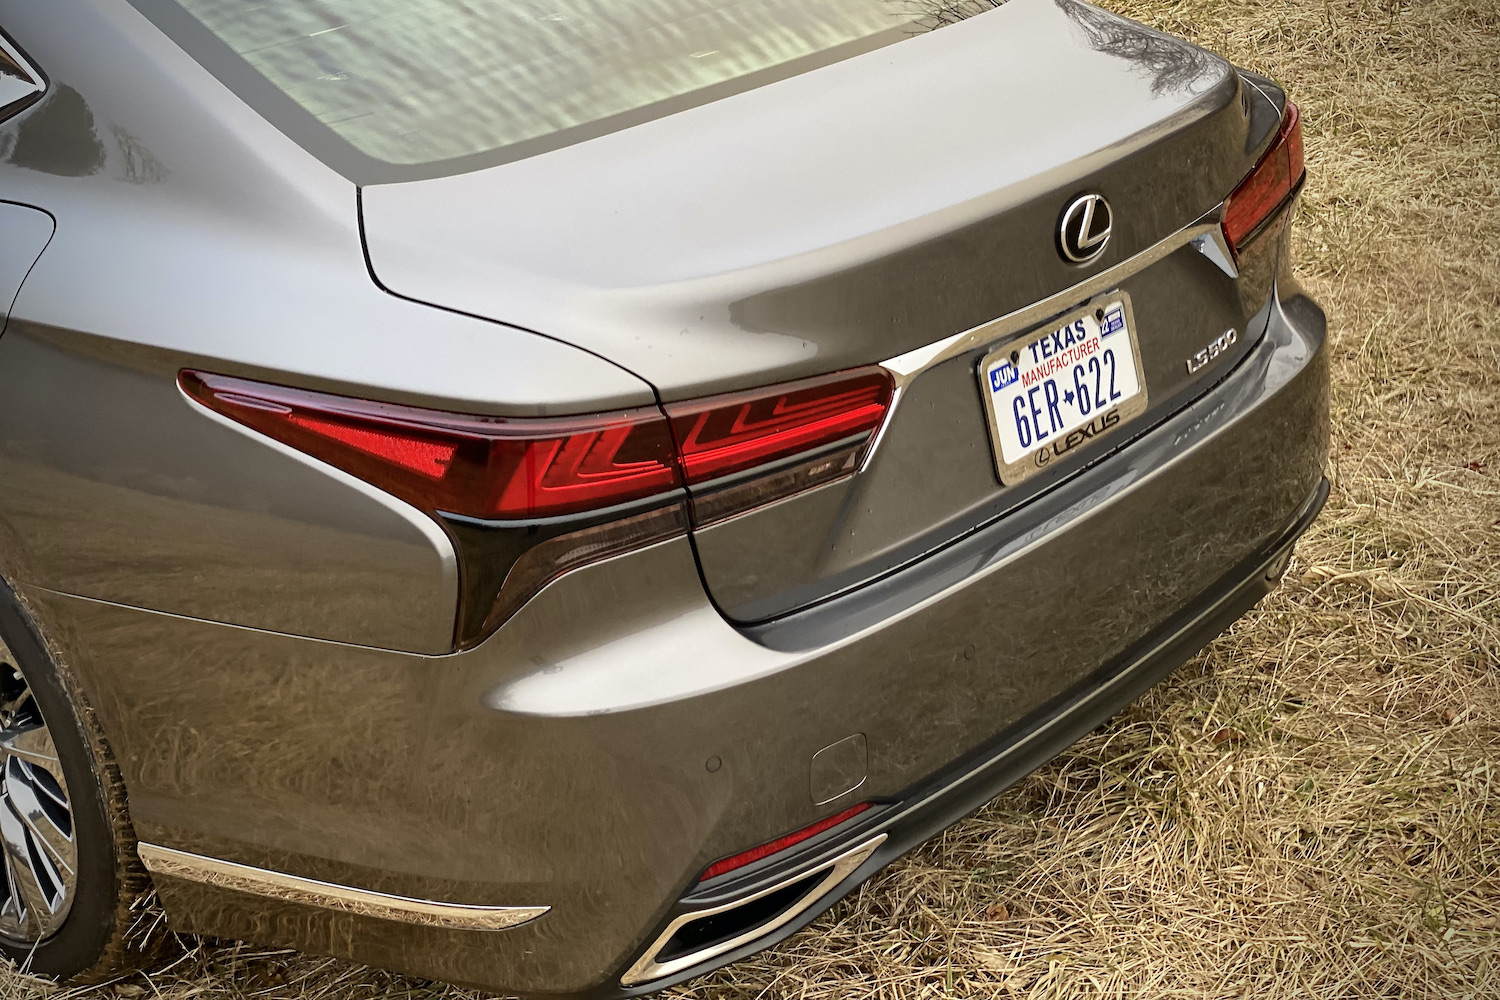 A close-up of the 2021 Lexus LS500's taillight in a grassy field.